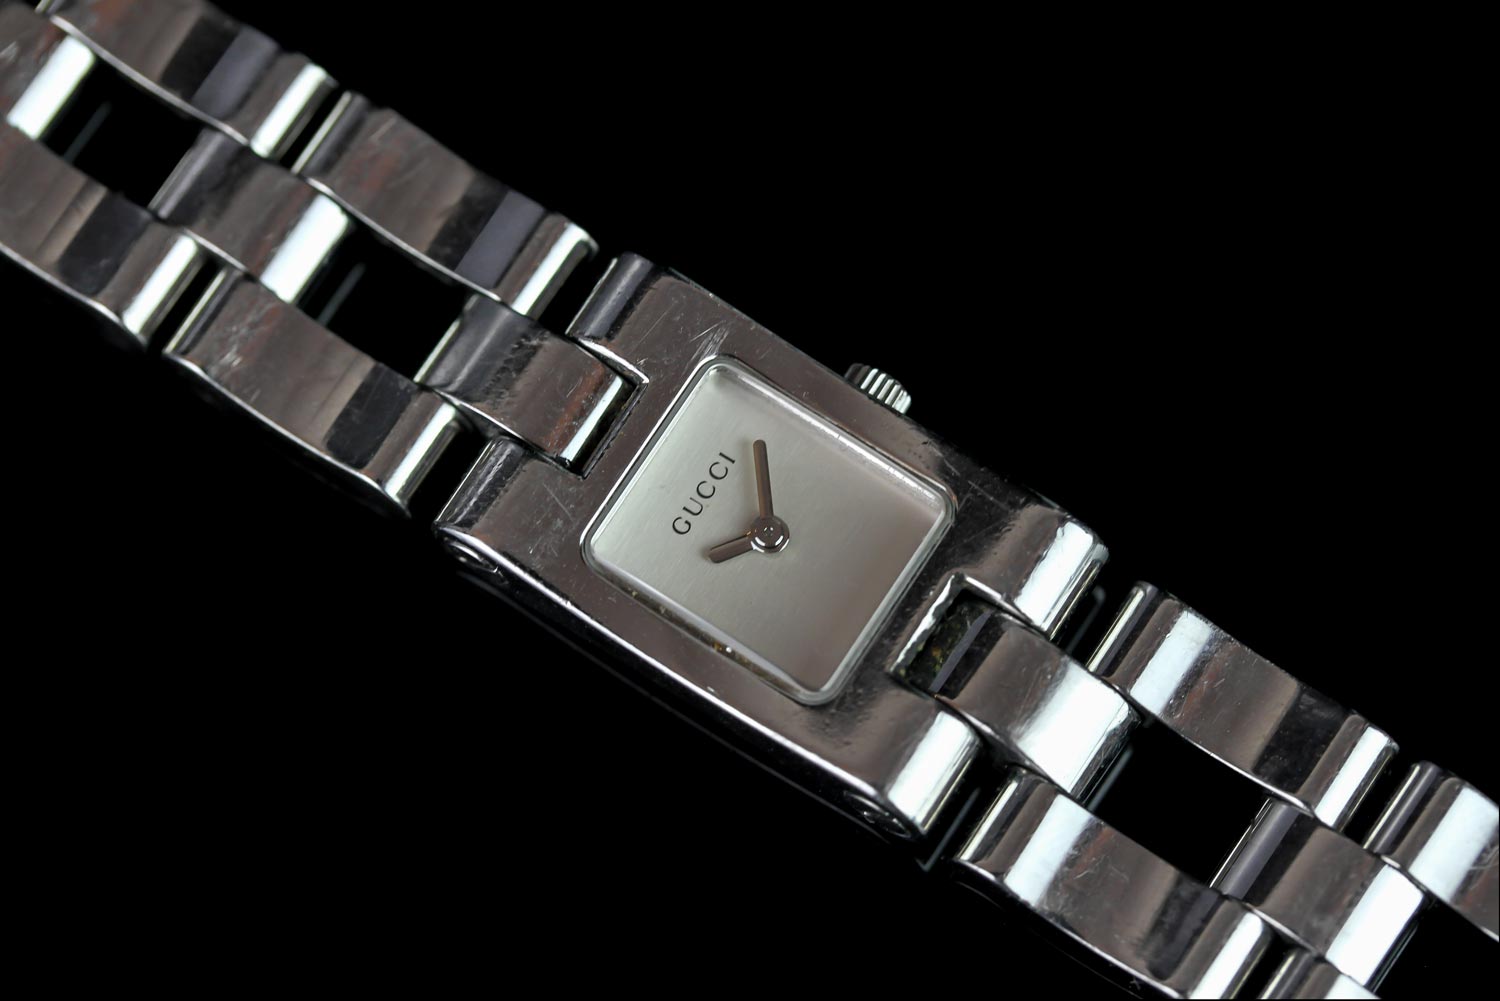 LADIES GUCCI WRISTWATCH REF 2305L, rectangular silver dial, 17mm stainless steel case with snap case